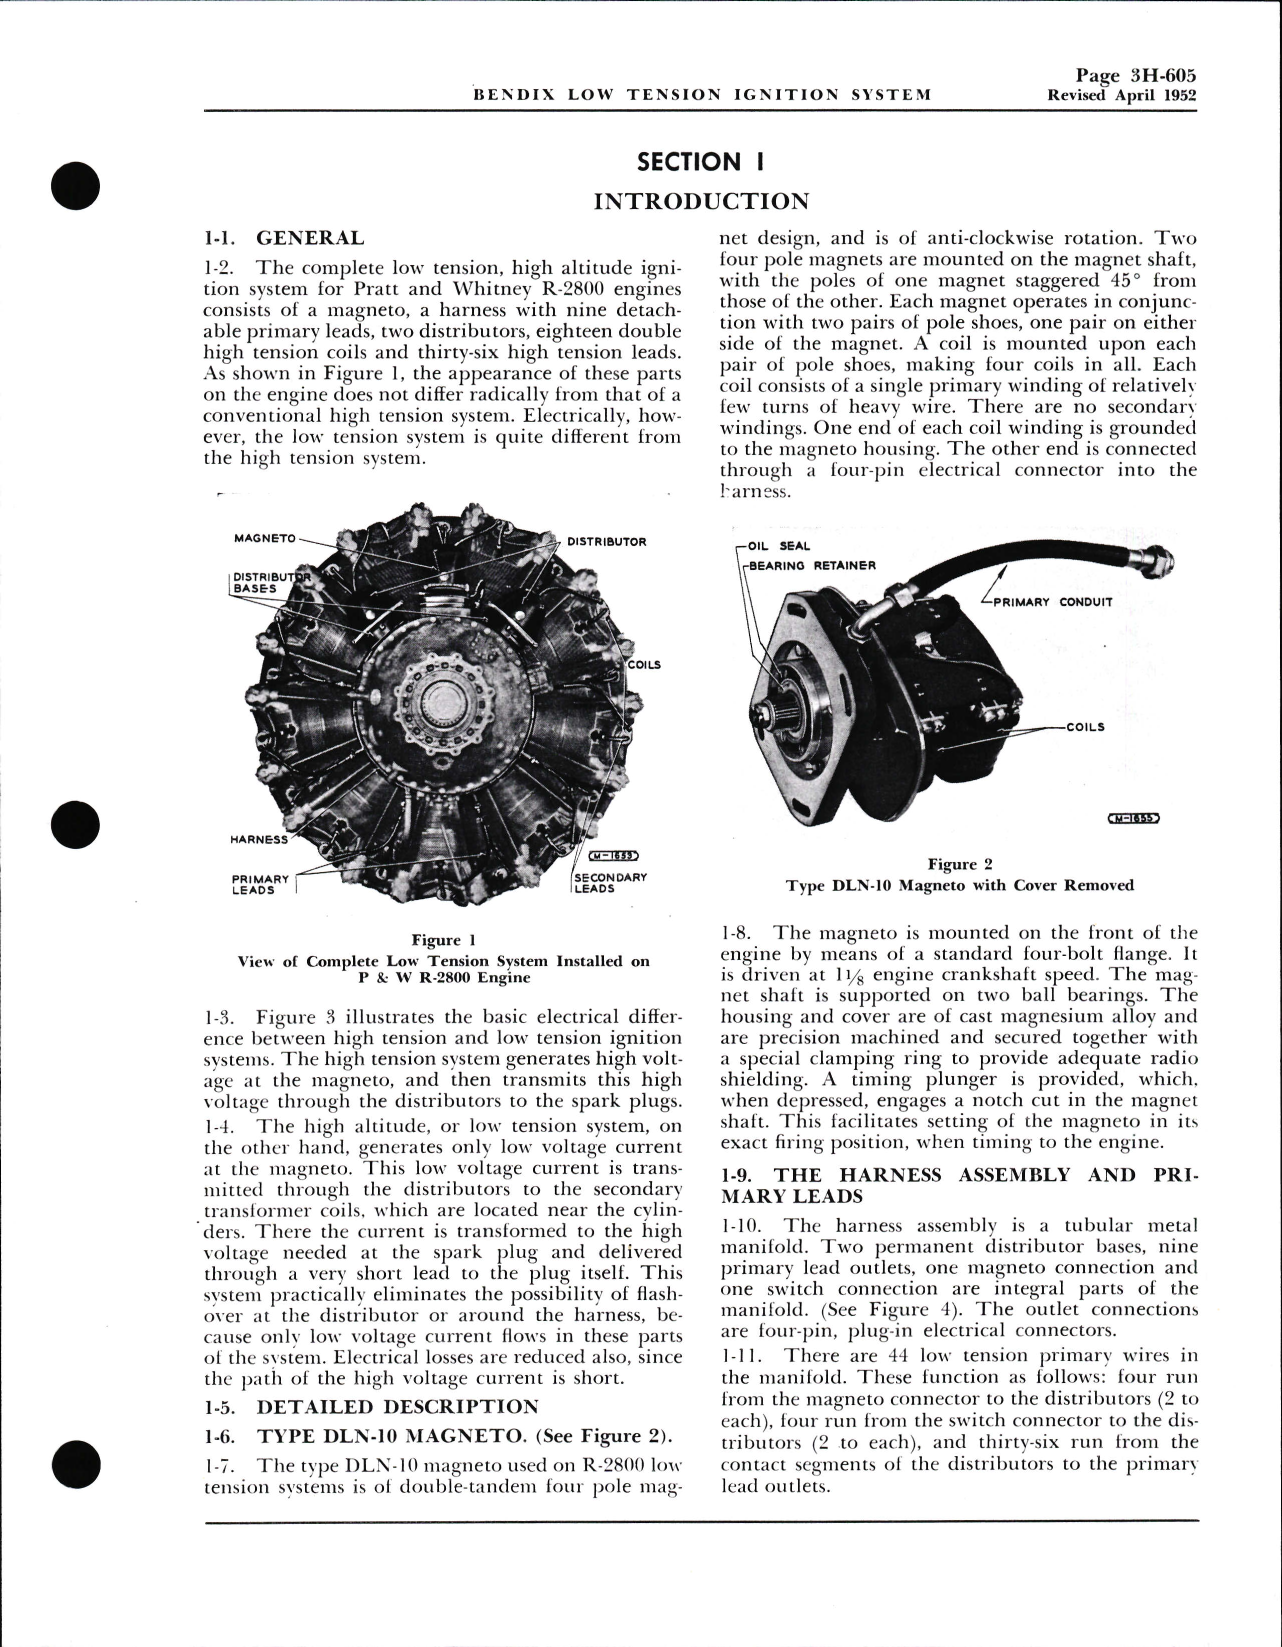 Sample page 5 from AirCorps Library document: Overhaul Instructions for Bendix Low Tension - High Altitude Ignition for Pratt & Whitney R-2800-C